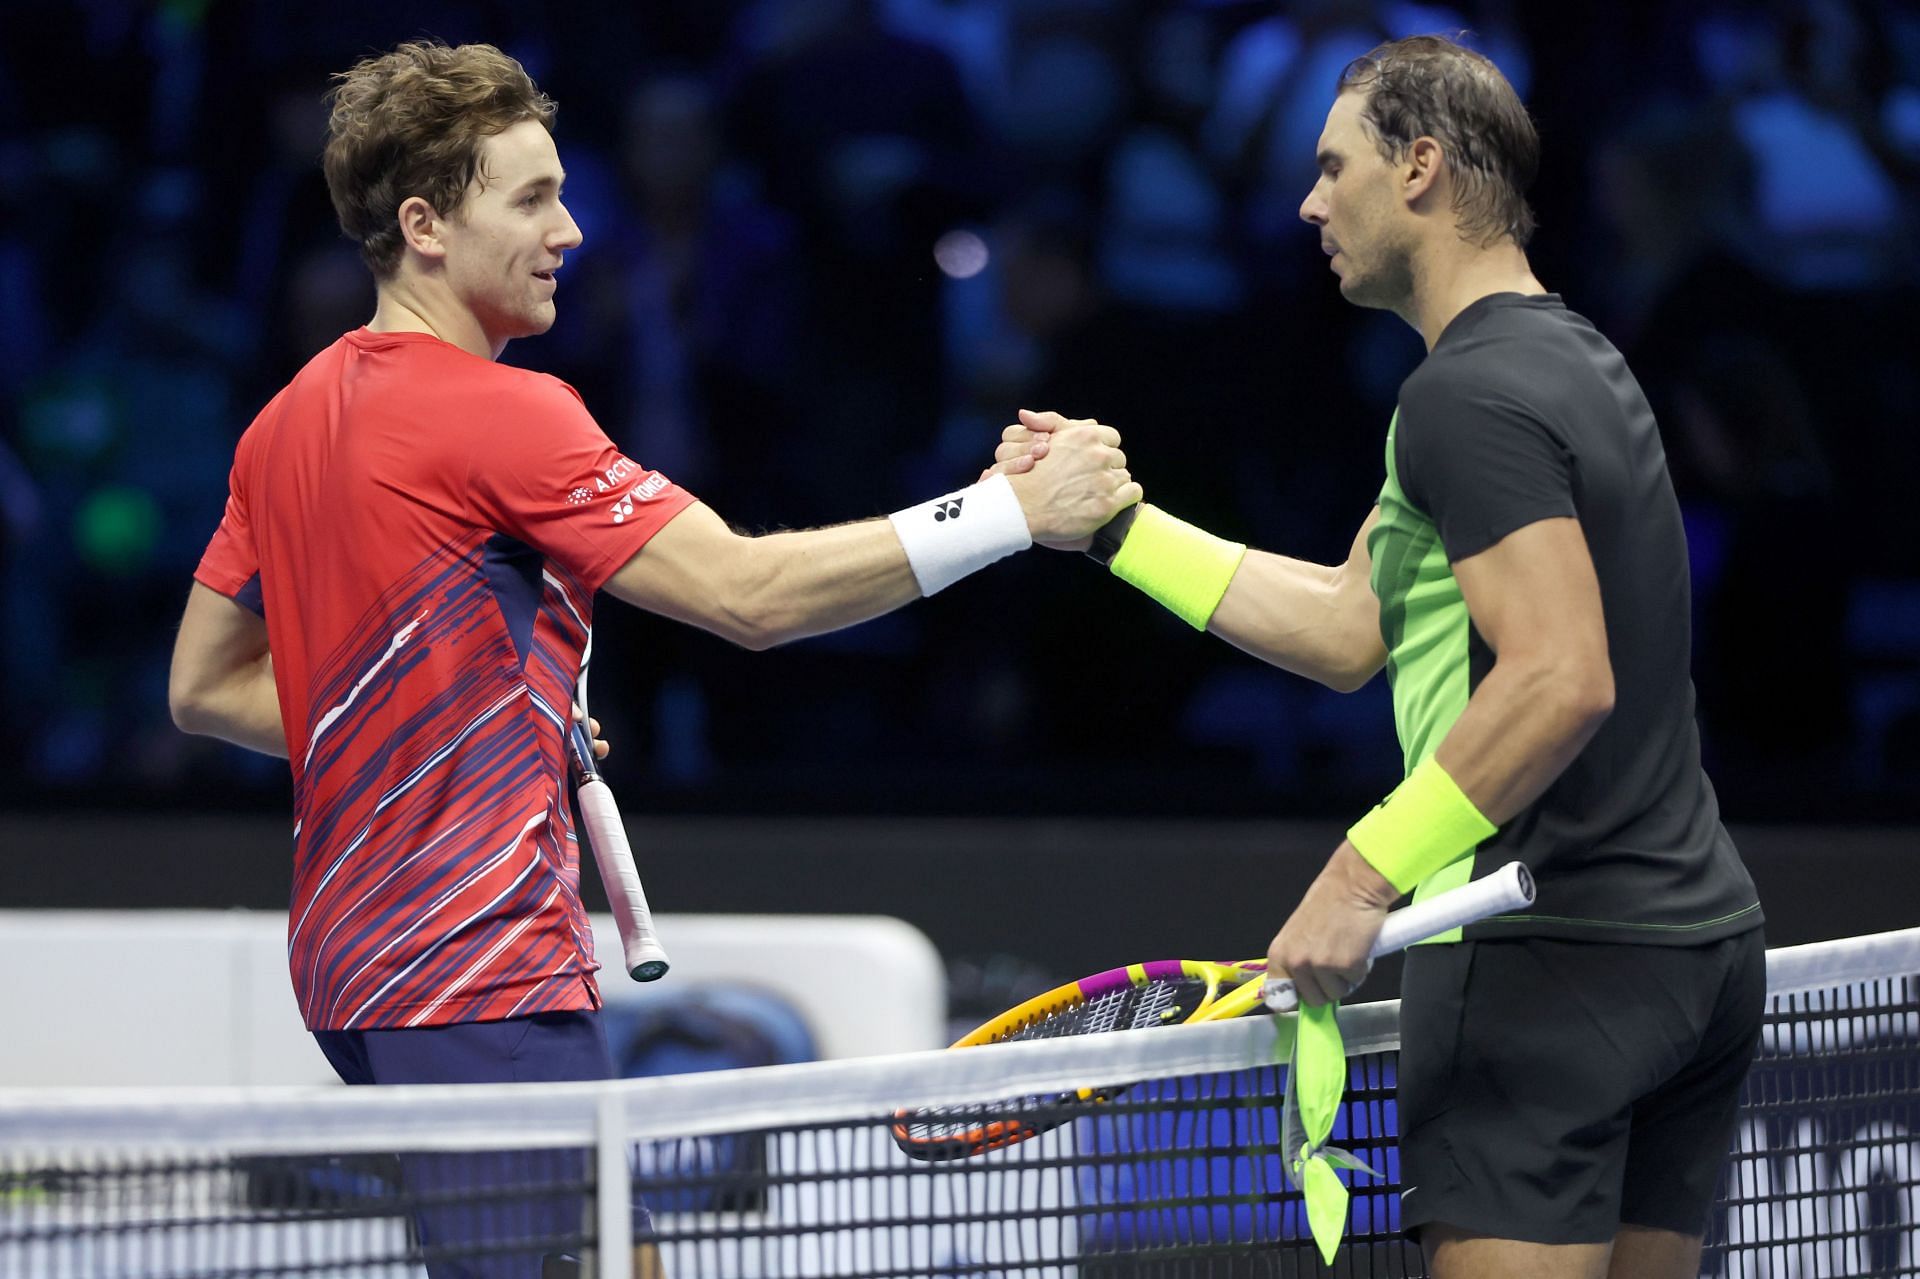 Rafael Nadal and Casper Ruud after their match at the ATP Finals